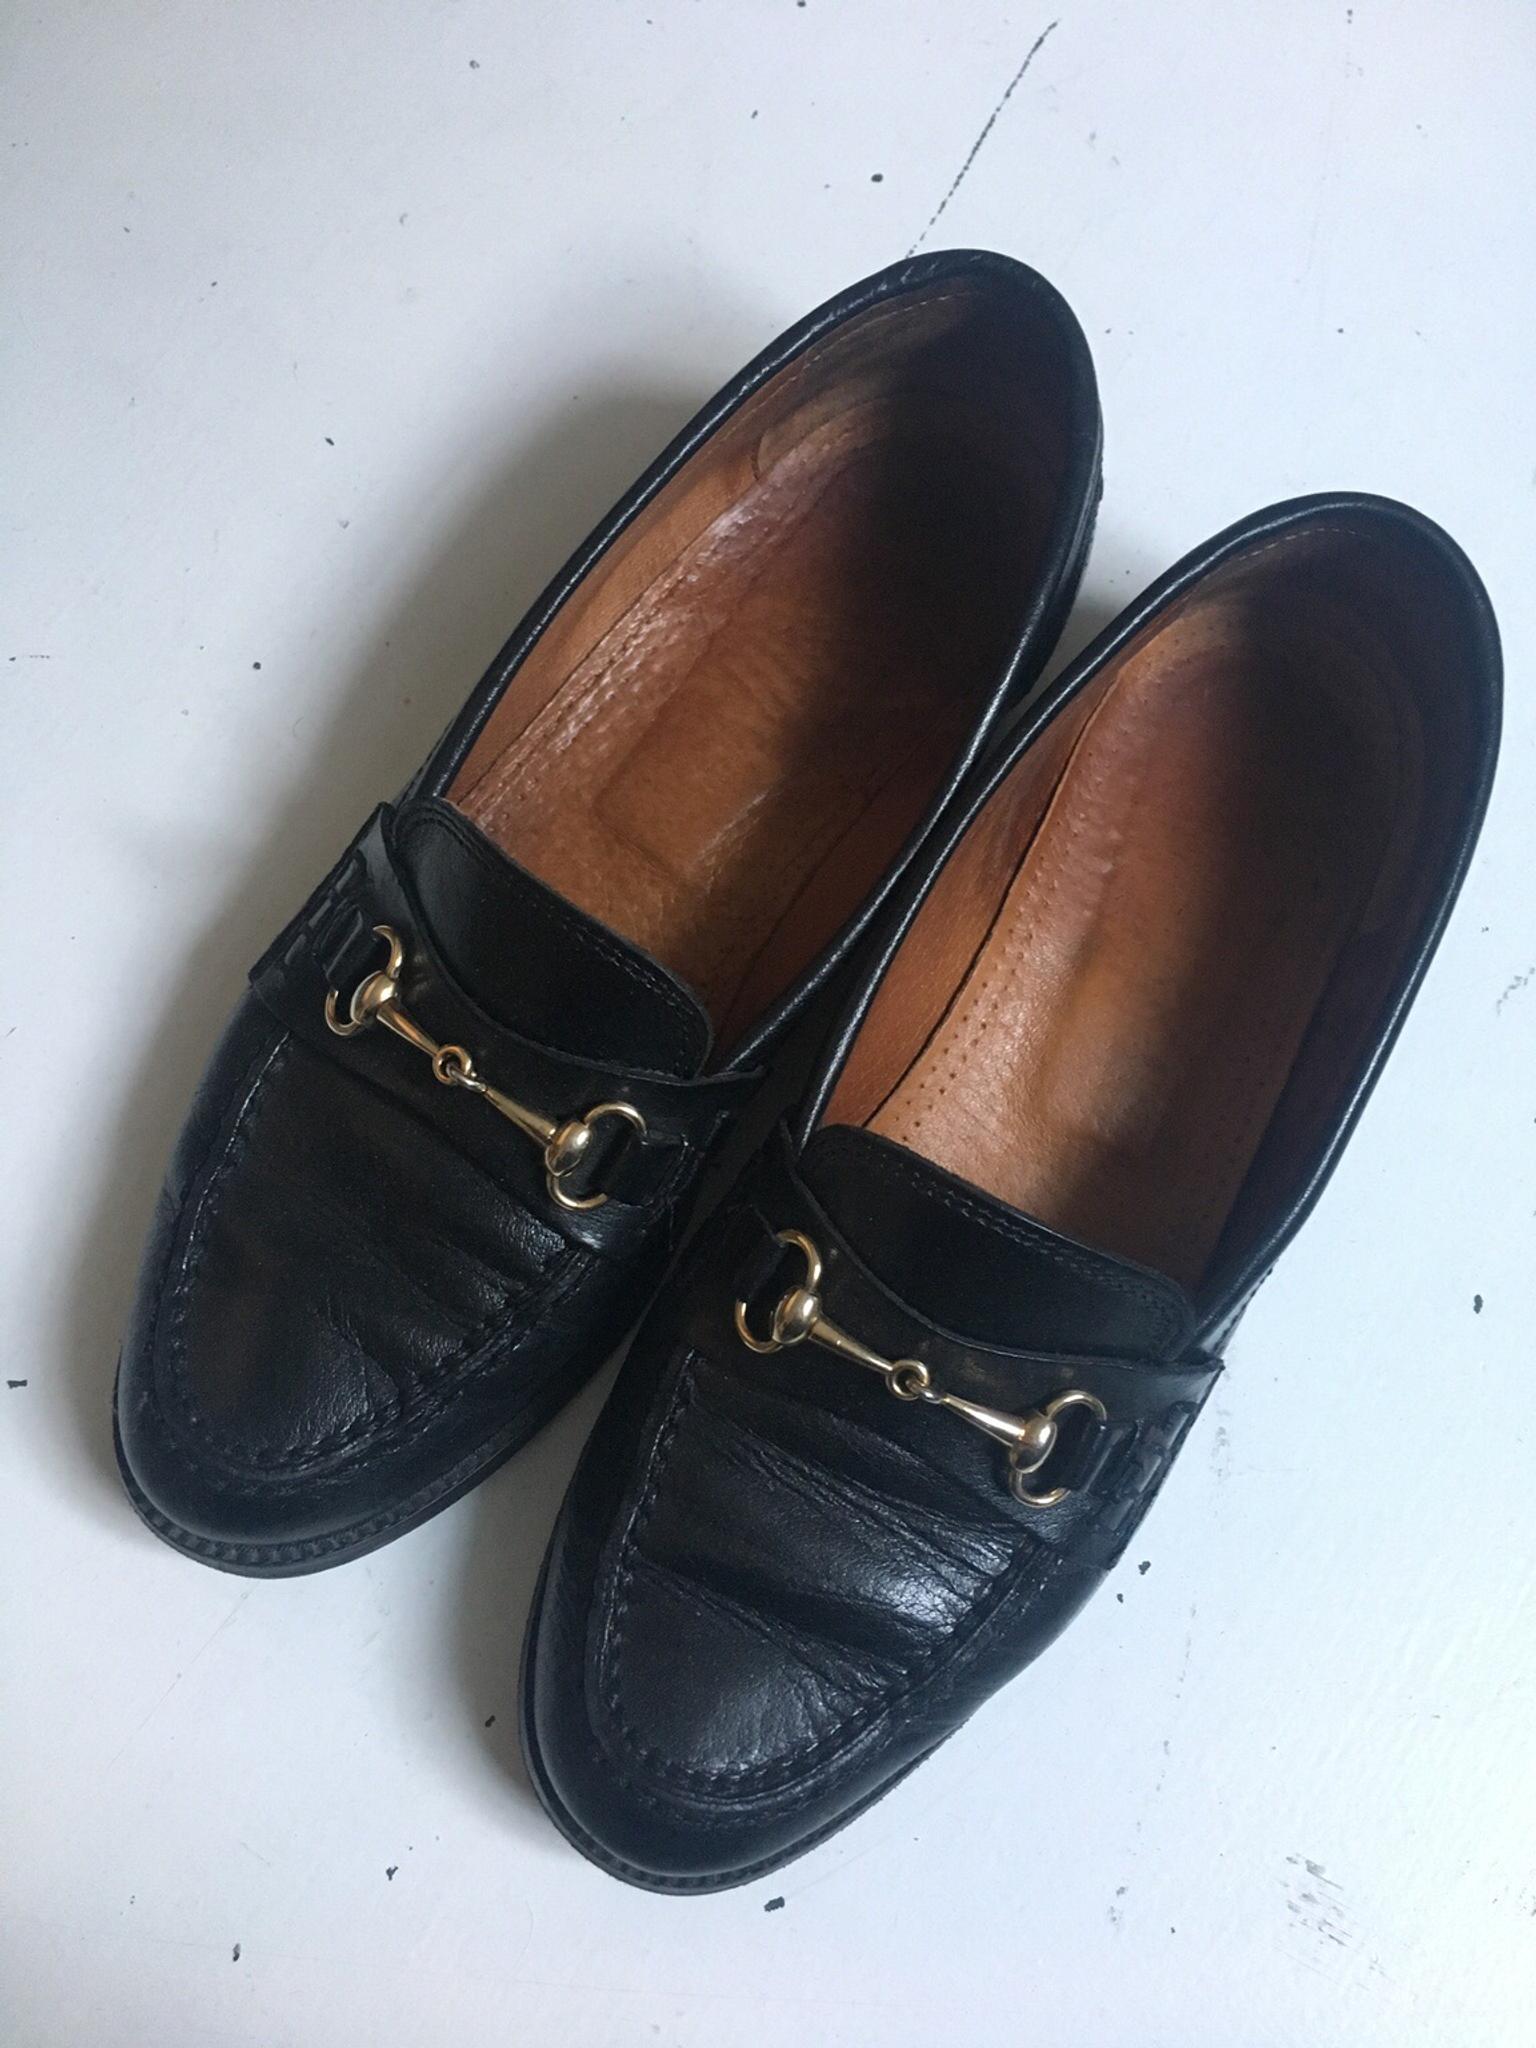 russell and bromley black loafers